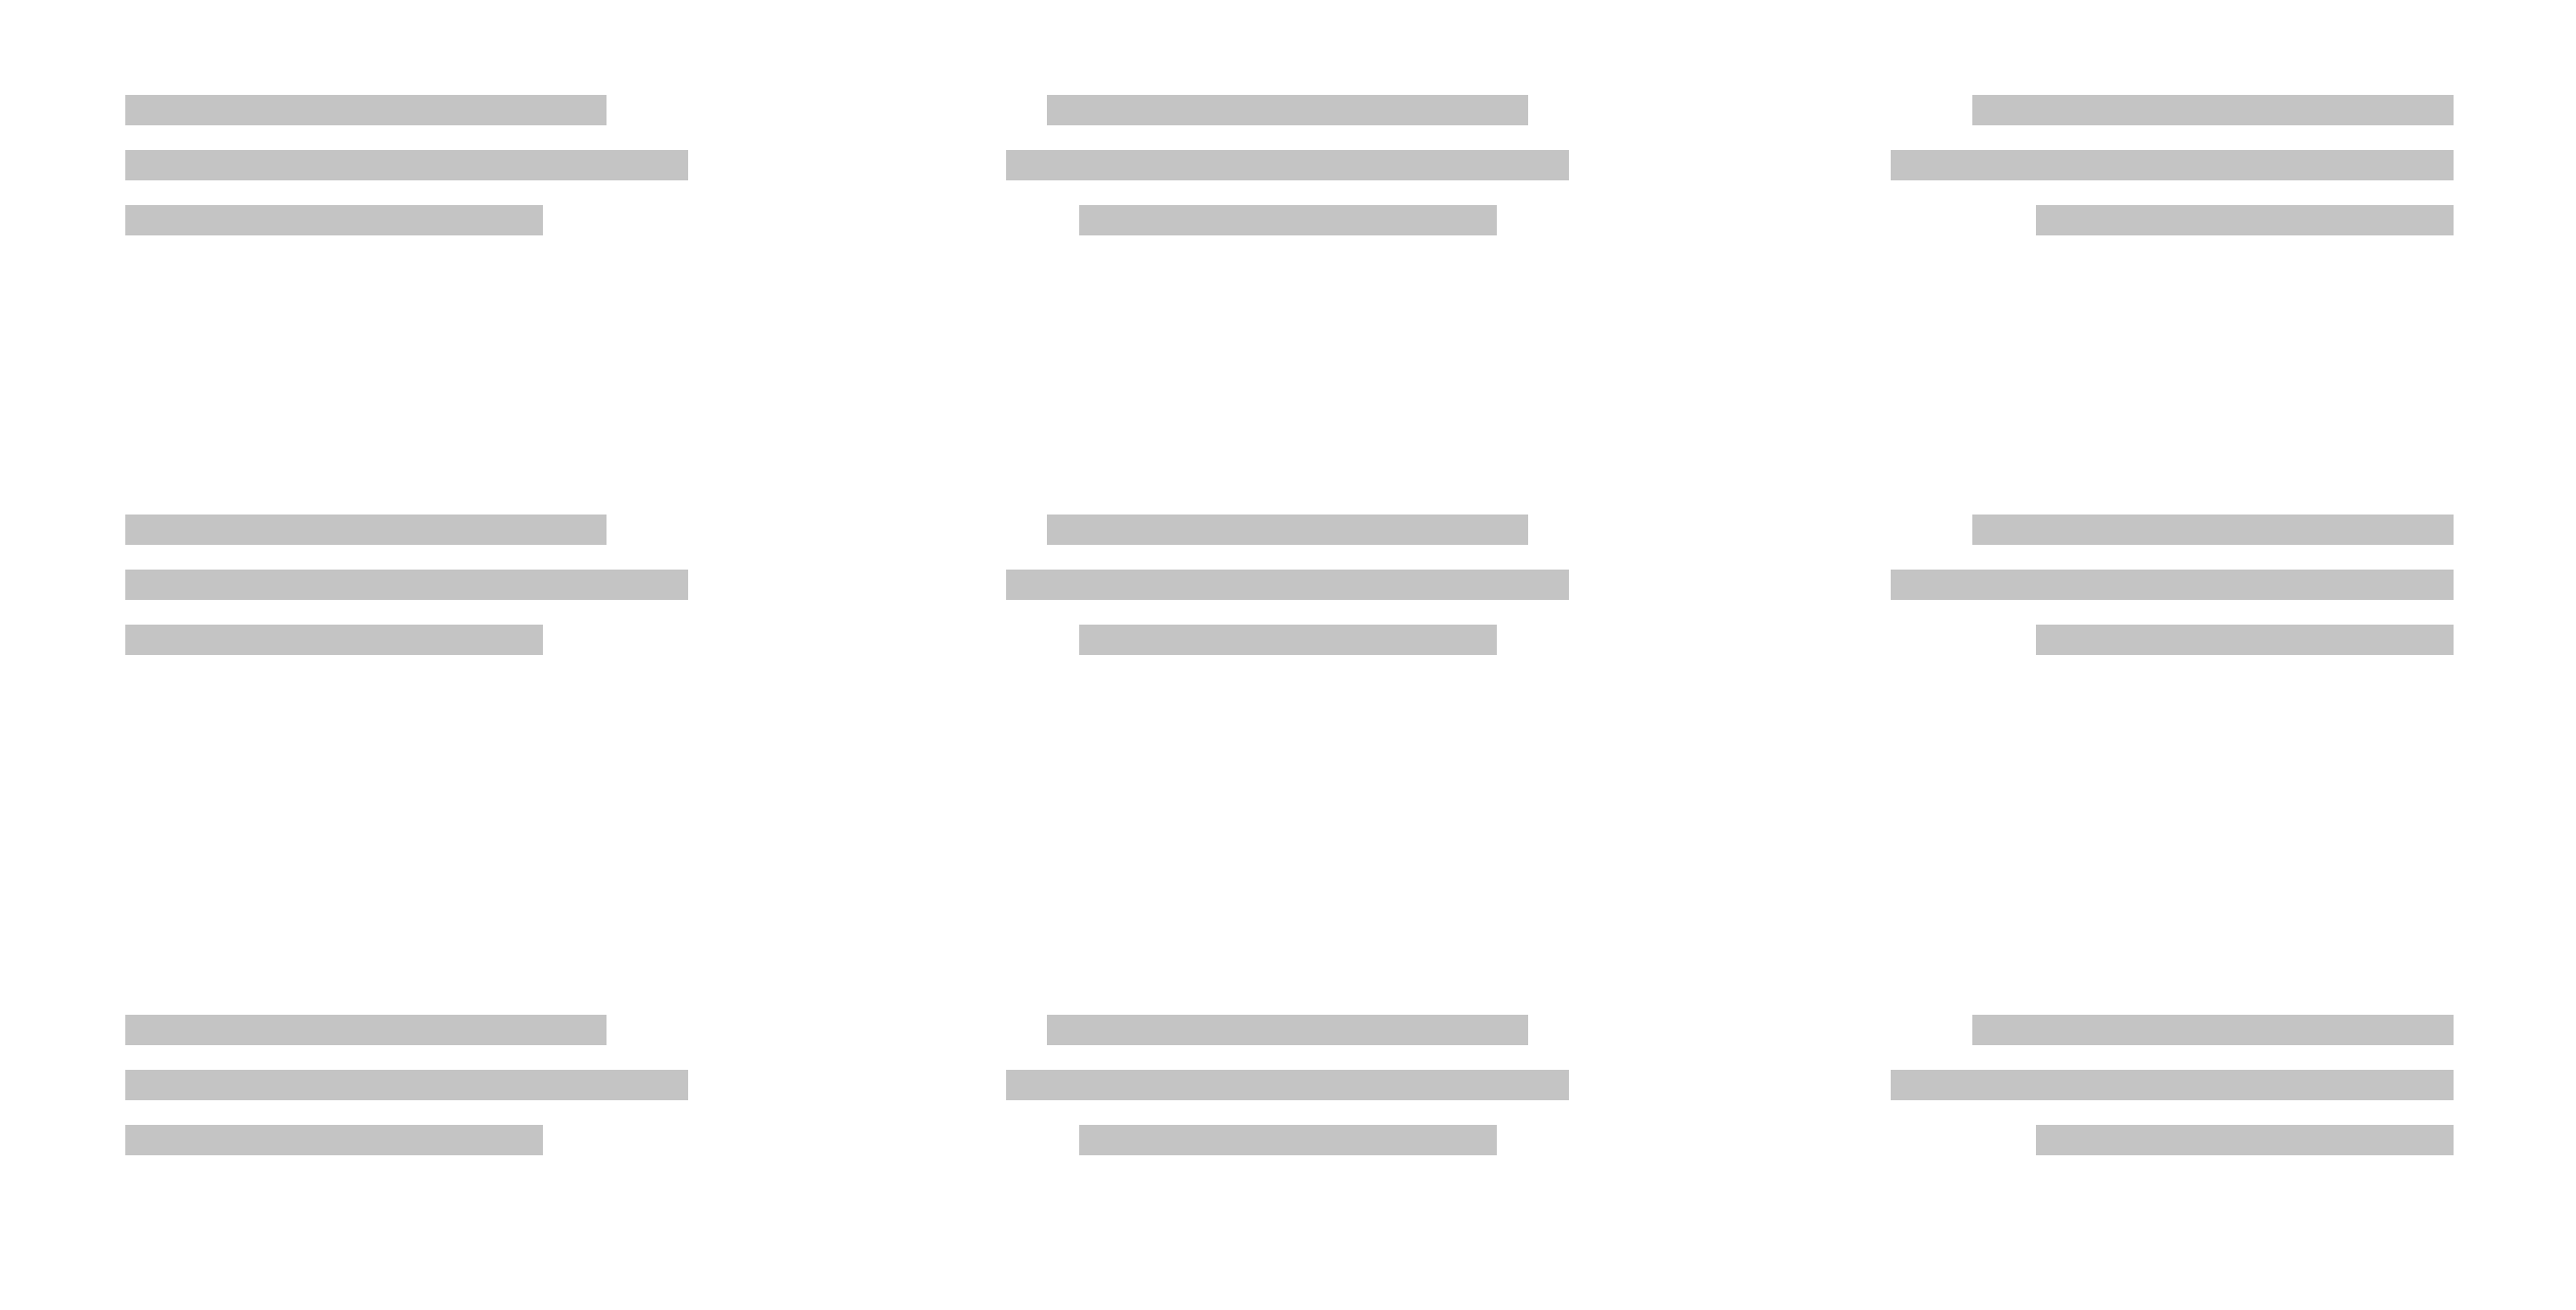 Blank view showing abstract text placed in the nine potential spots where it would be allowed: top left, top middle, top right, middle left all the way to bottom right.